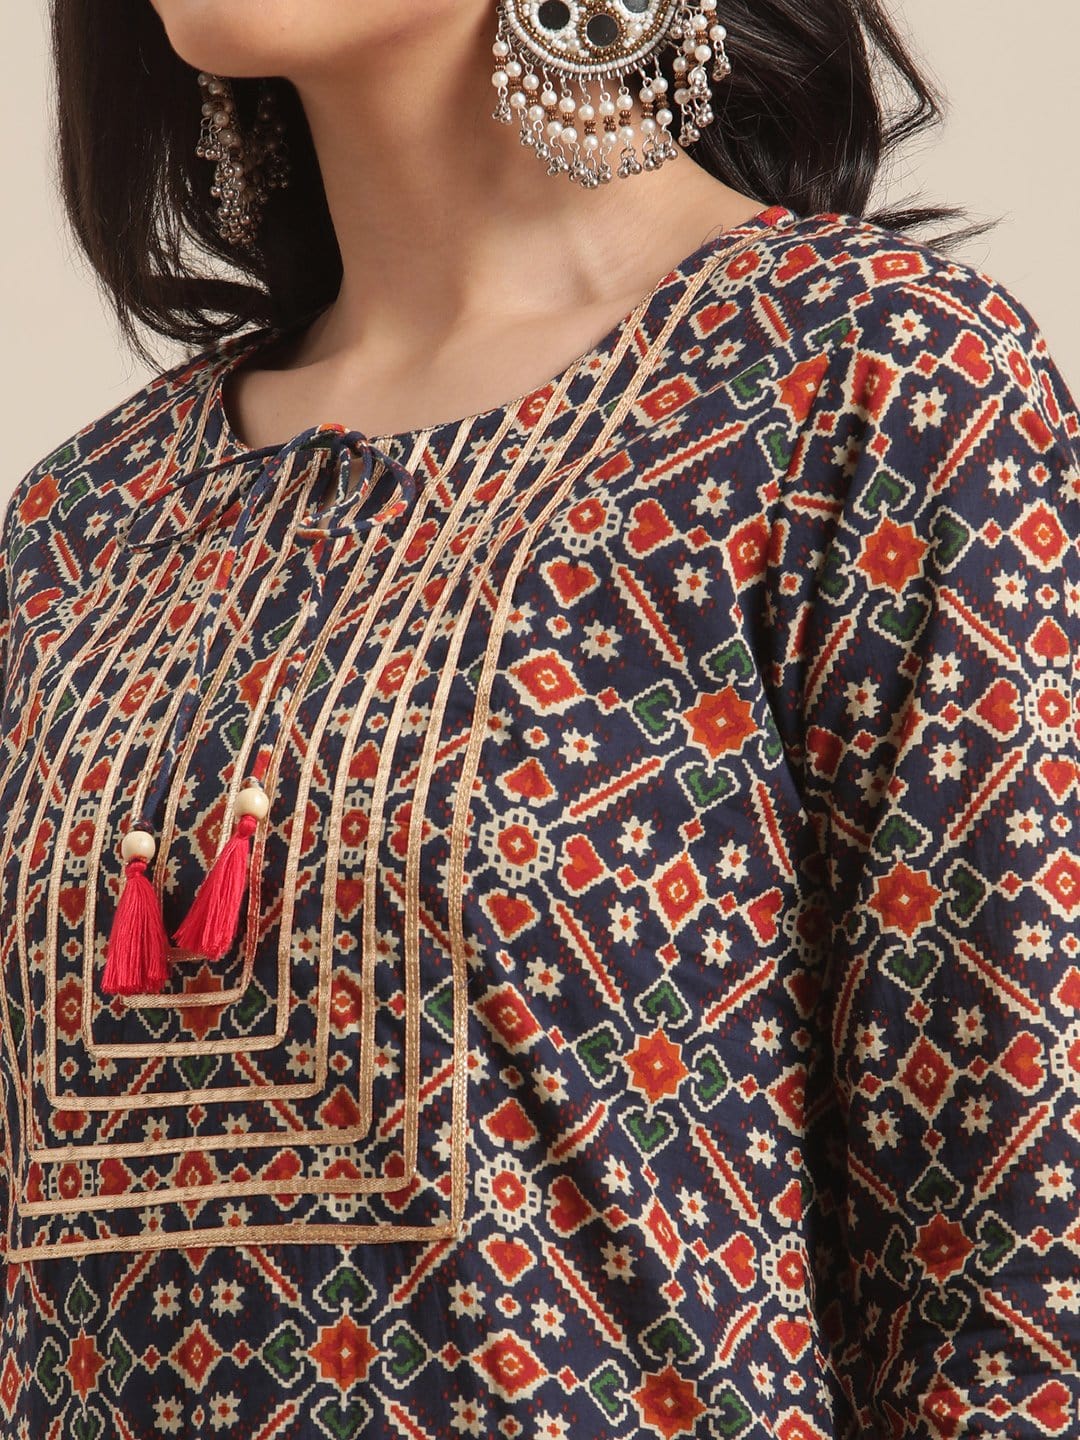 Women's Blue And Maroon Abstract Printed Kurta With Gota Work On Yoke And 3/4Th Sleeves - Final Clearance Sale